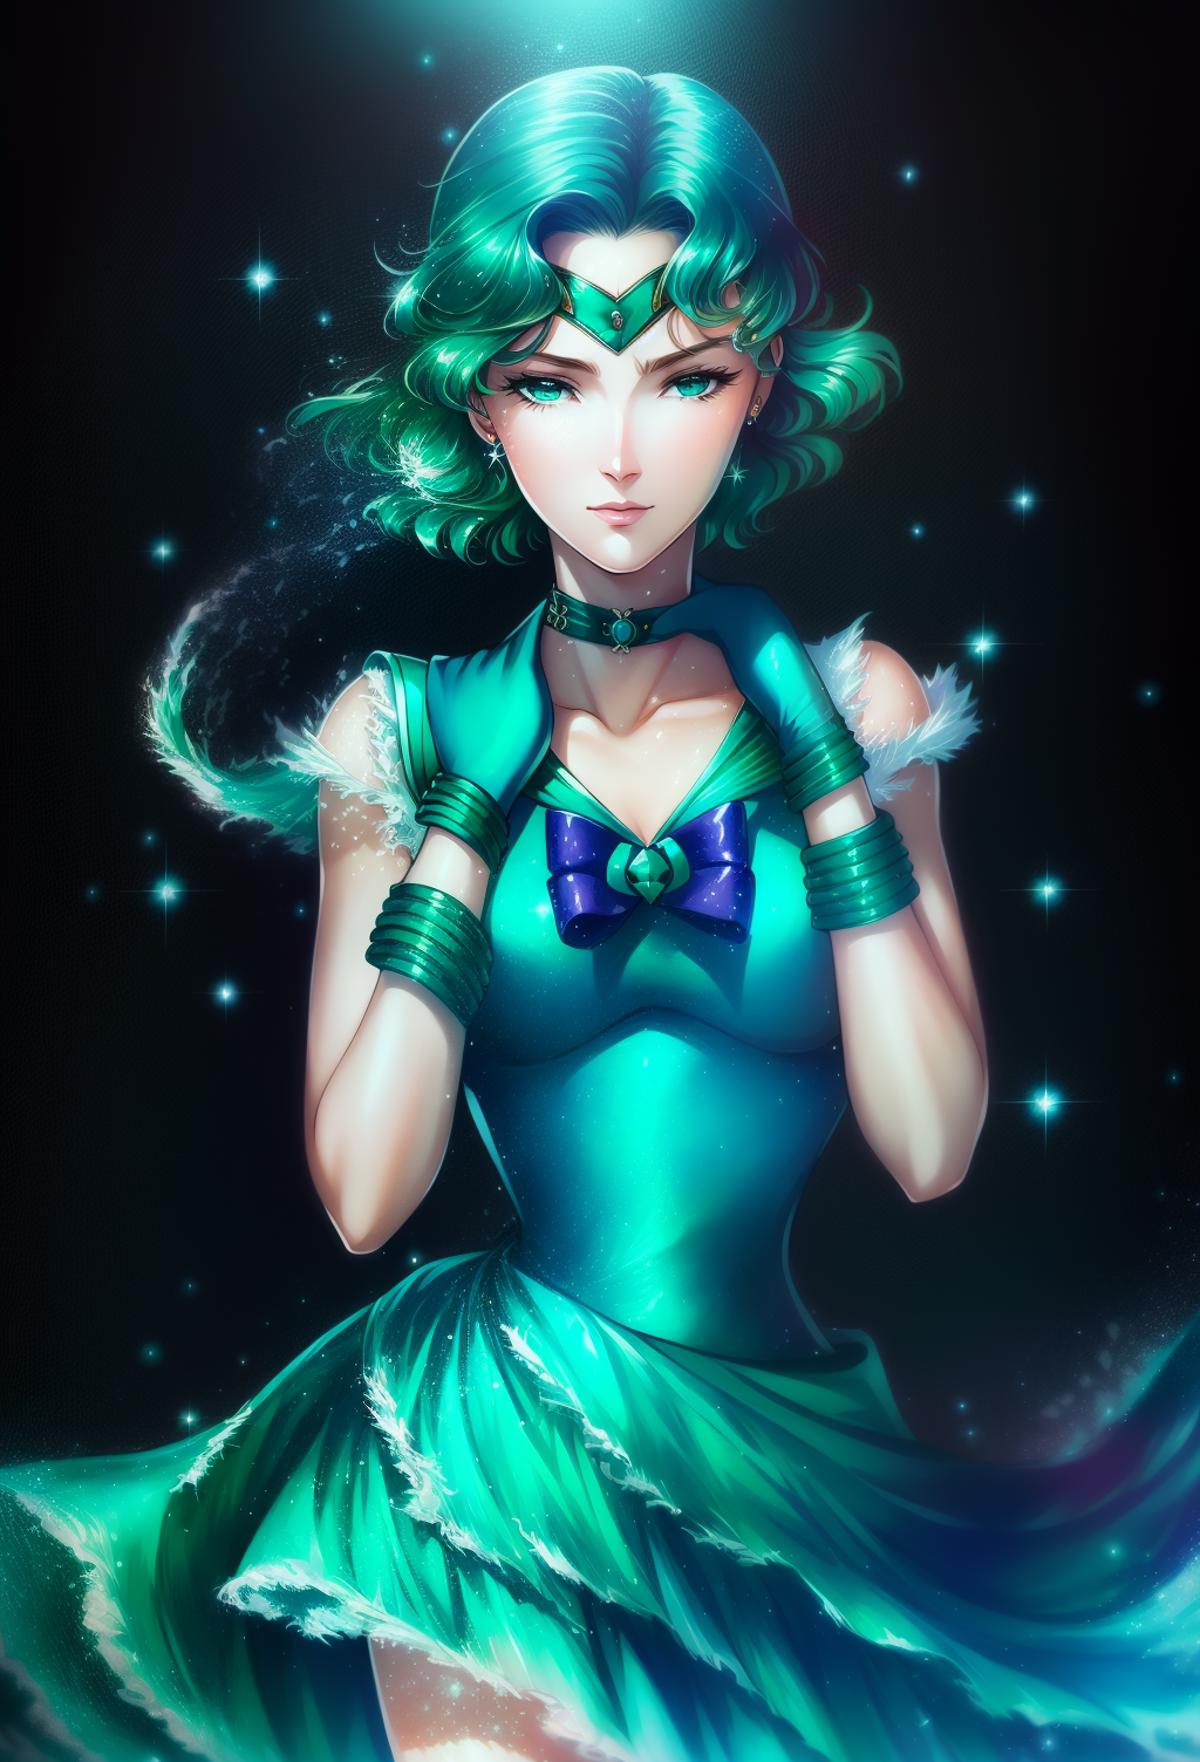 Sailor Moon——Sailor Neptune image by fansay